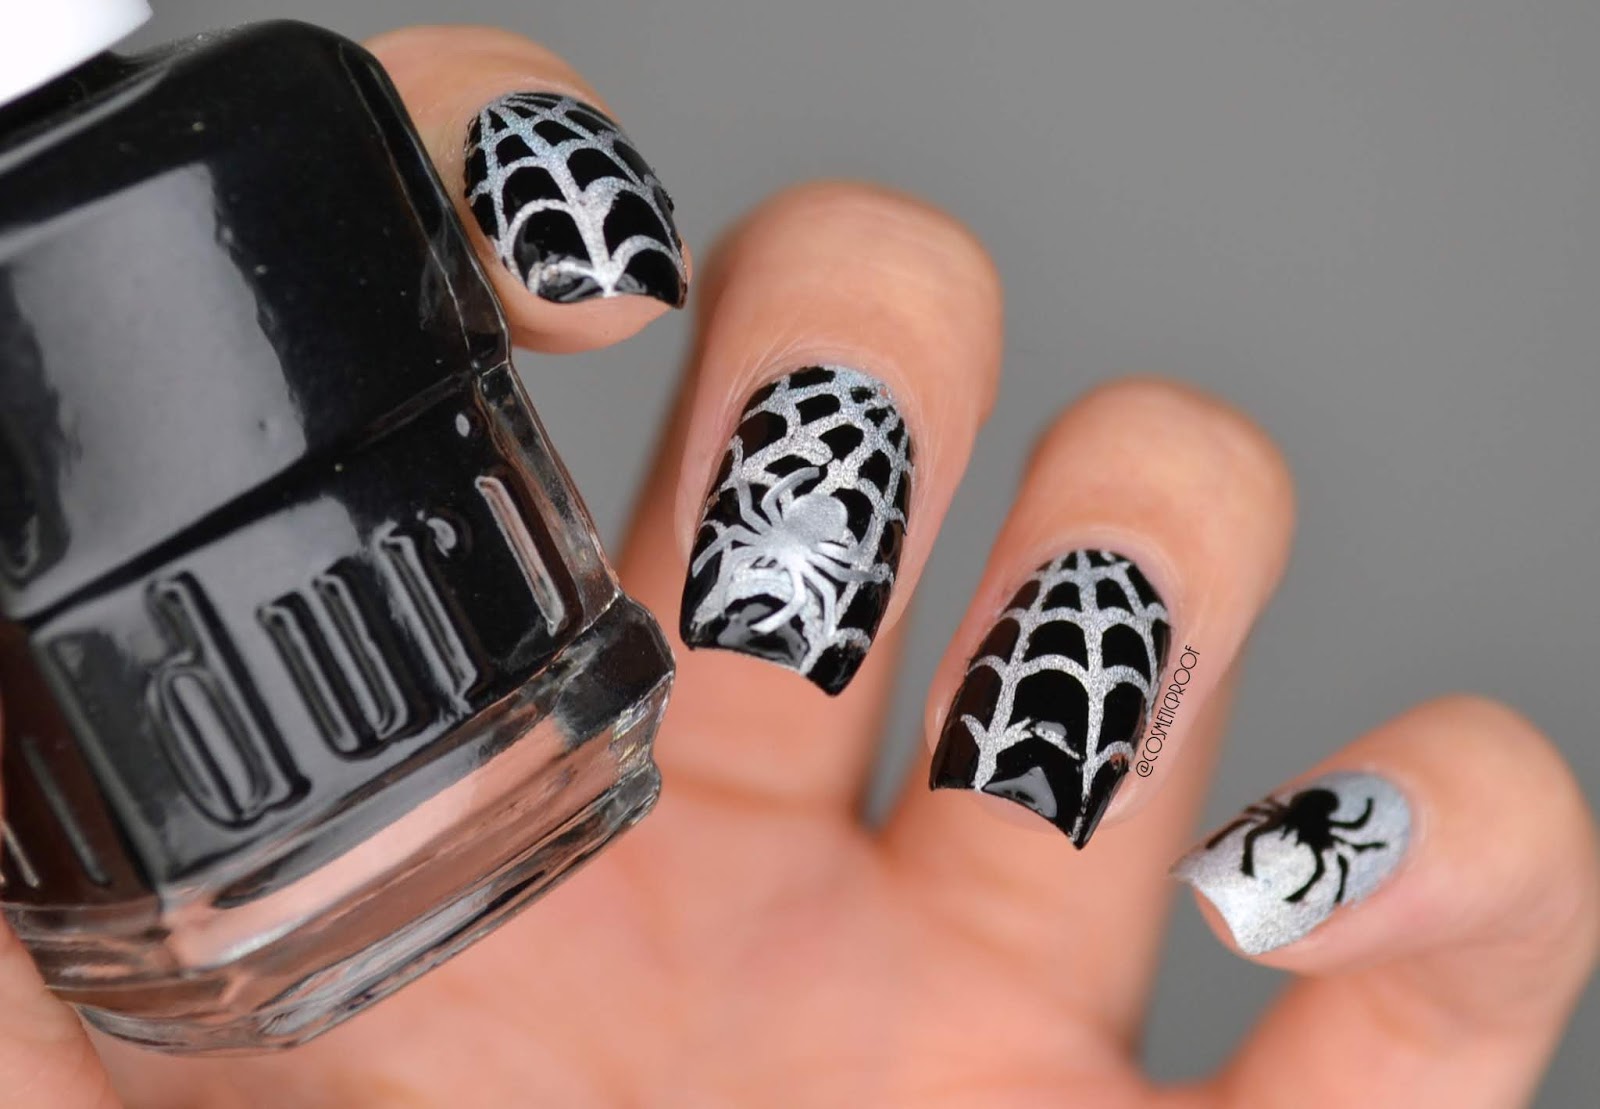 1. Spooky Spider Web Nails - wide 5